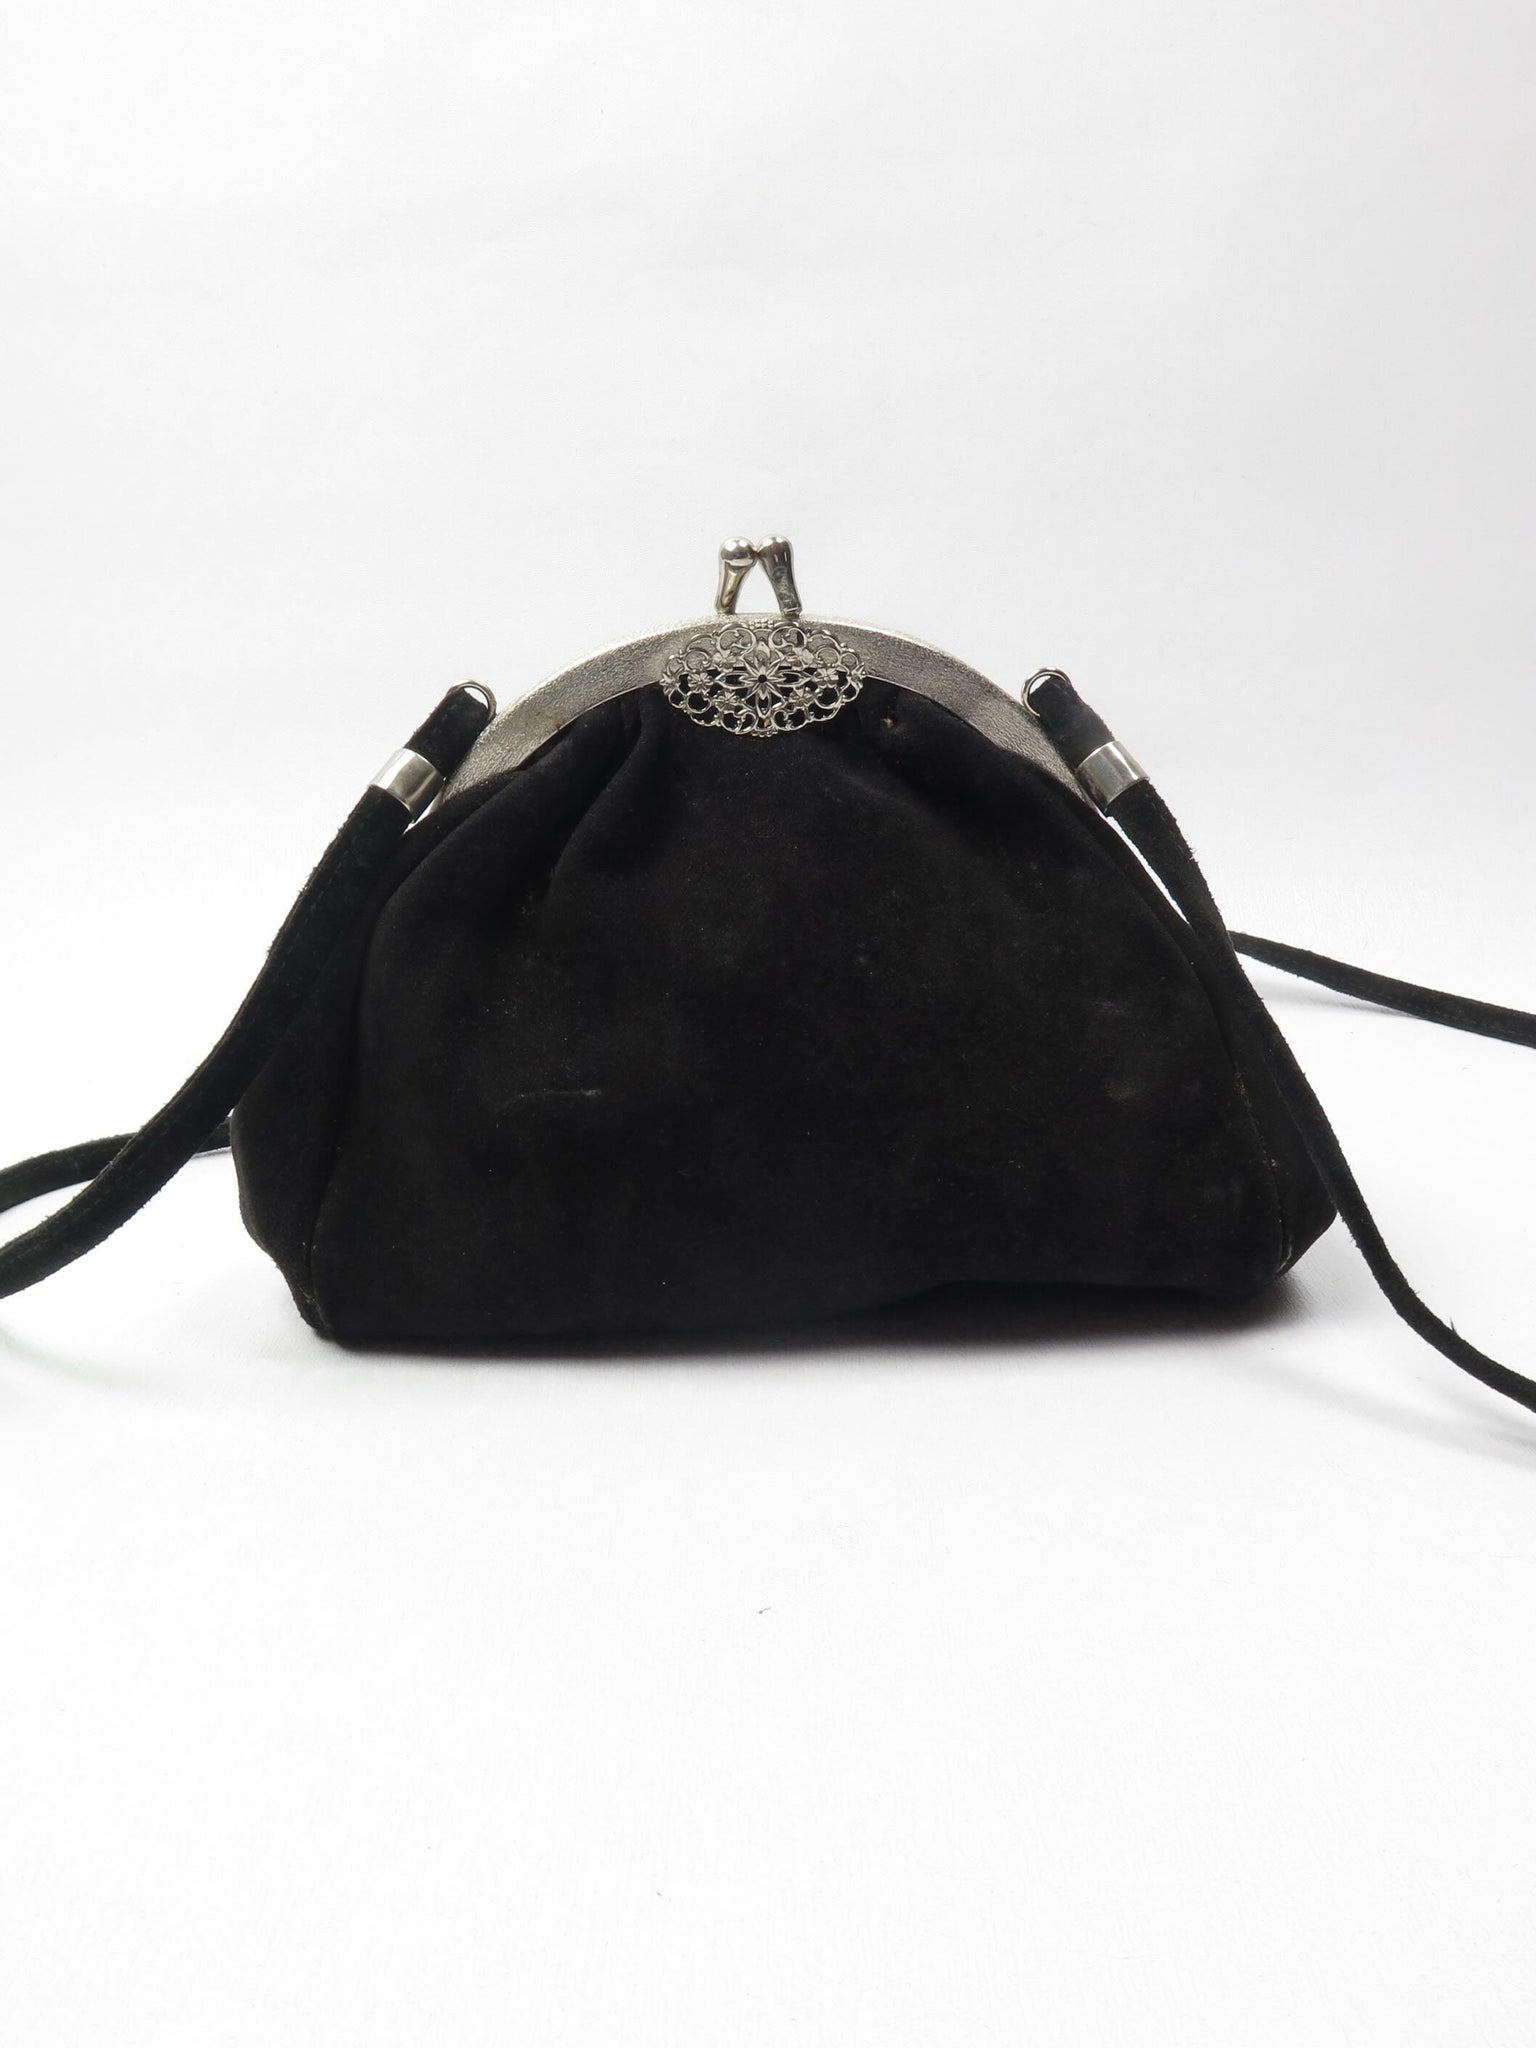 Vintage Black Suede Bag With Silver Clasp - The Harlequin